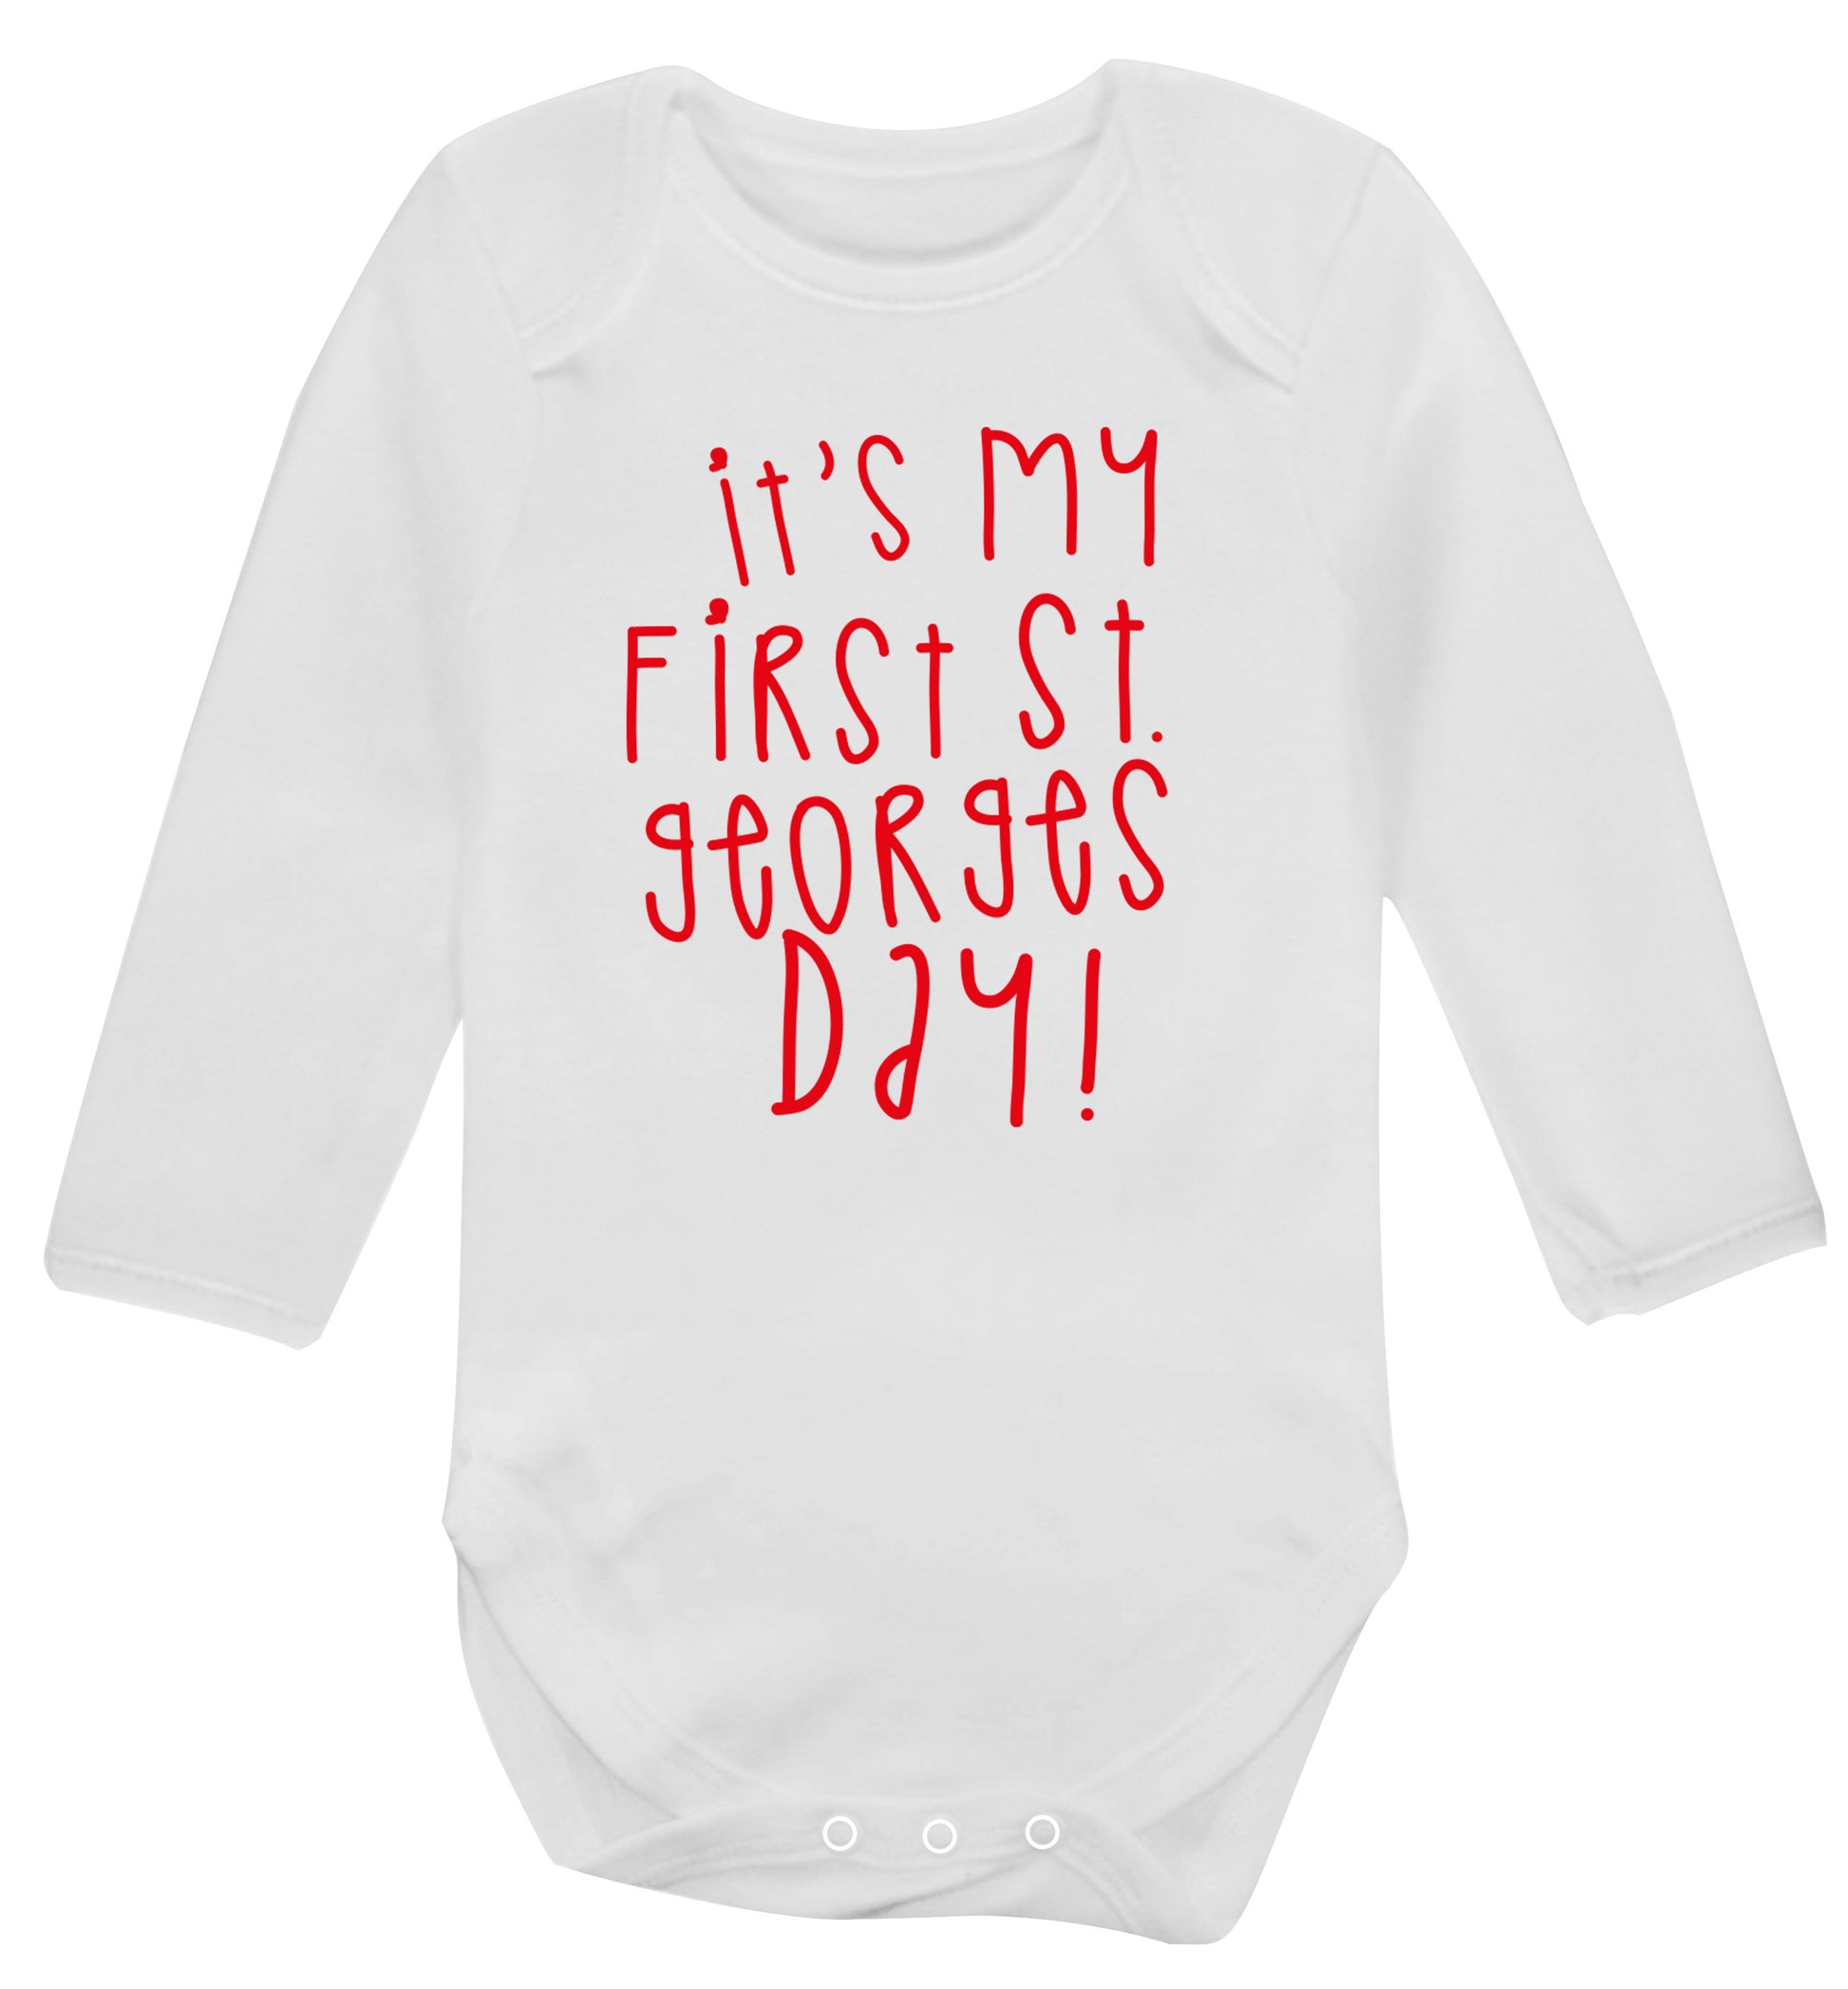 It's my first St Georges day Baby Vest long sleeved white 6-12 months